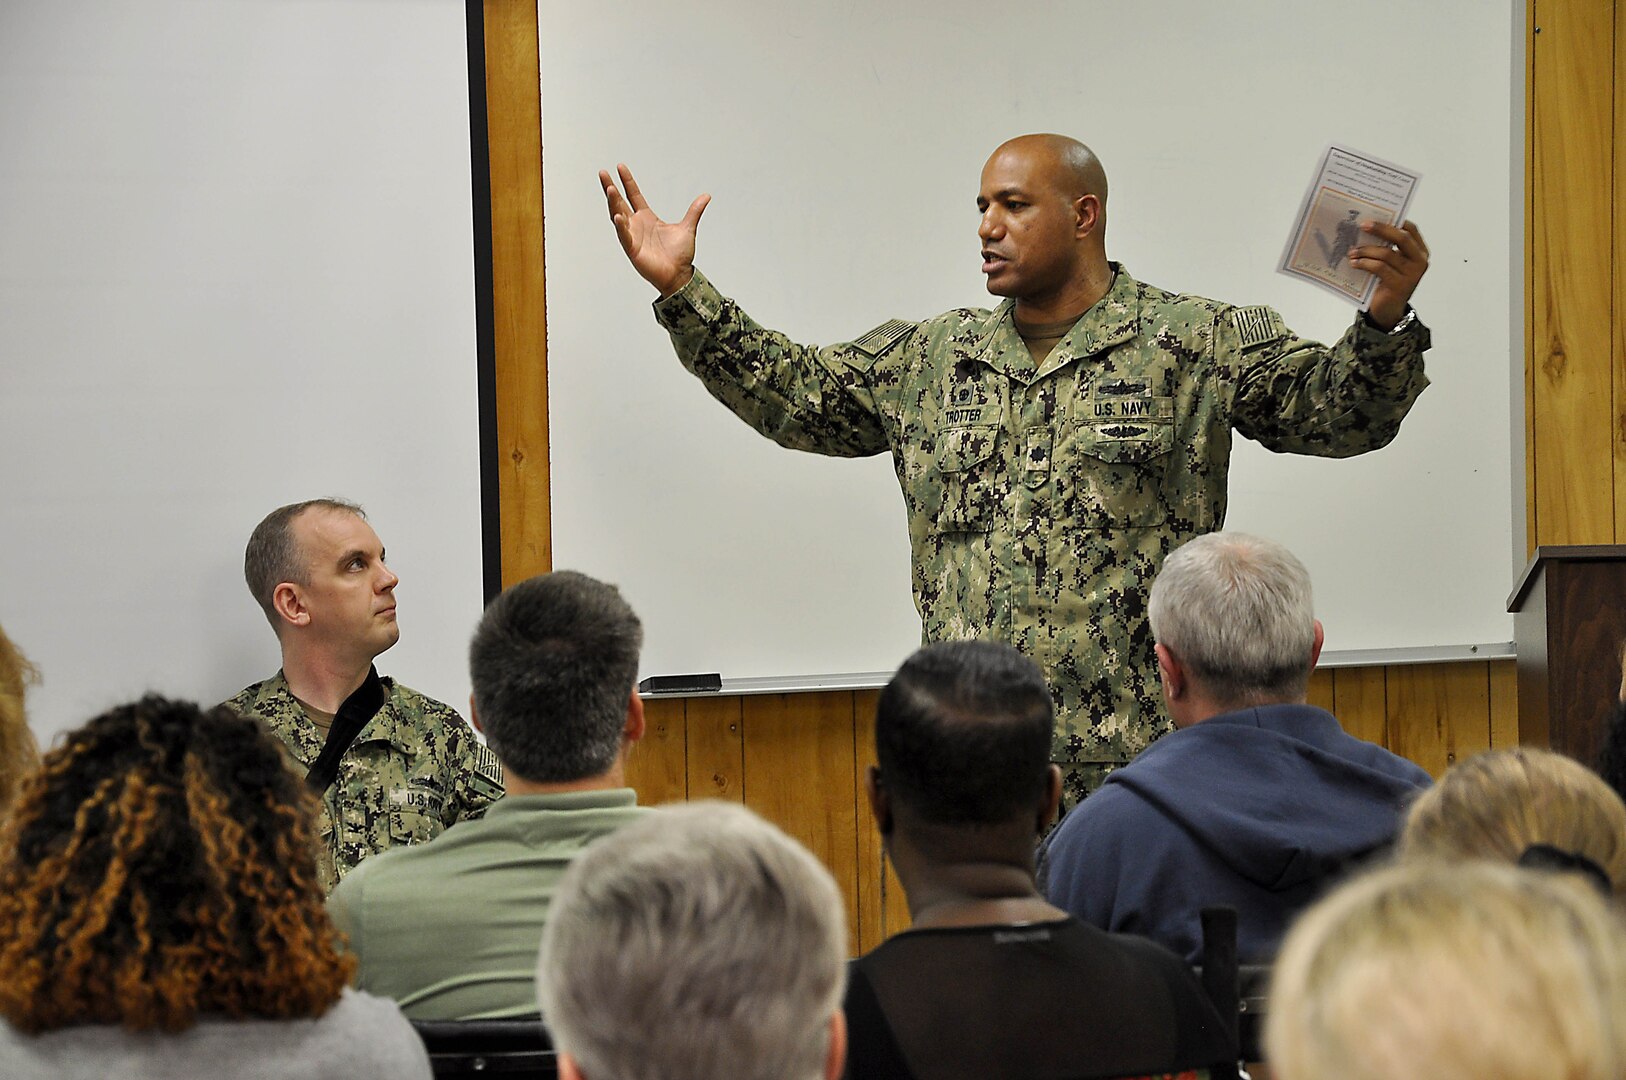 Cmdr. Robby Trotter, DDG 117 Precommissioning Unit commanding officer, speaks during the Supervisor of Shipbuilding Gulf Coast Equal Employment Opportunity Advisory Committee African American/Black History Month event on Feb. 20.